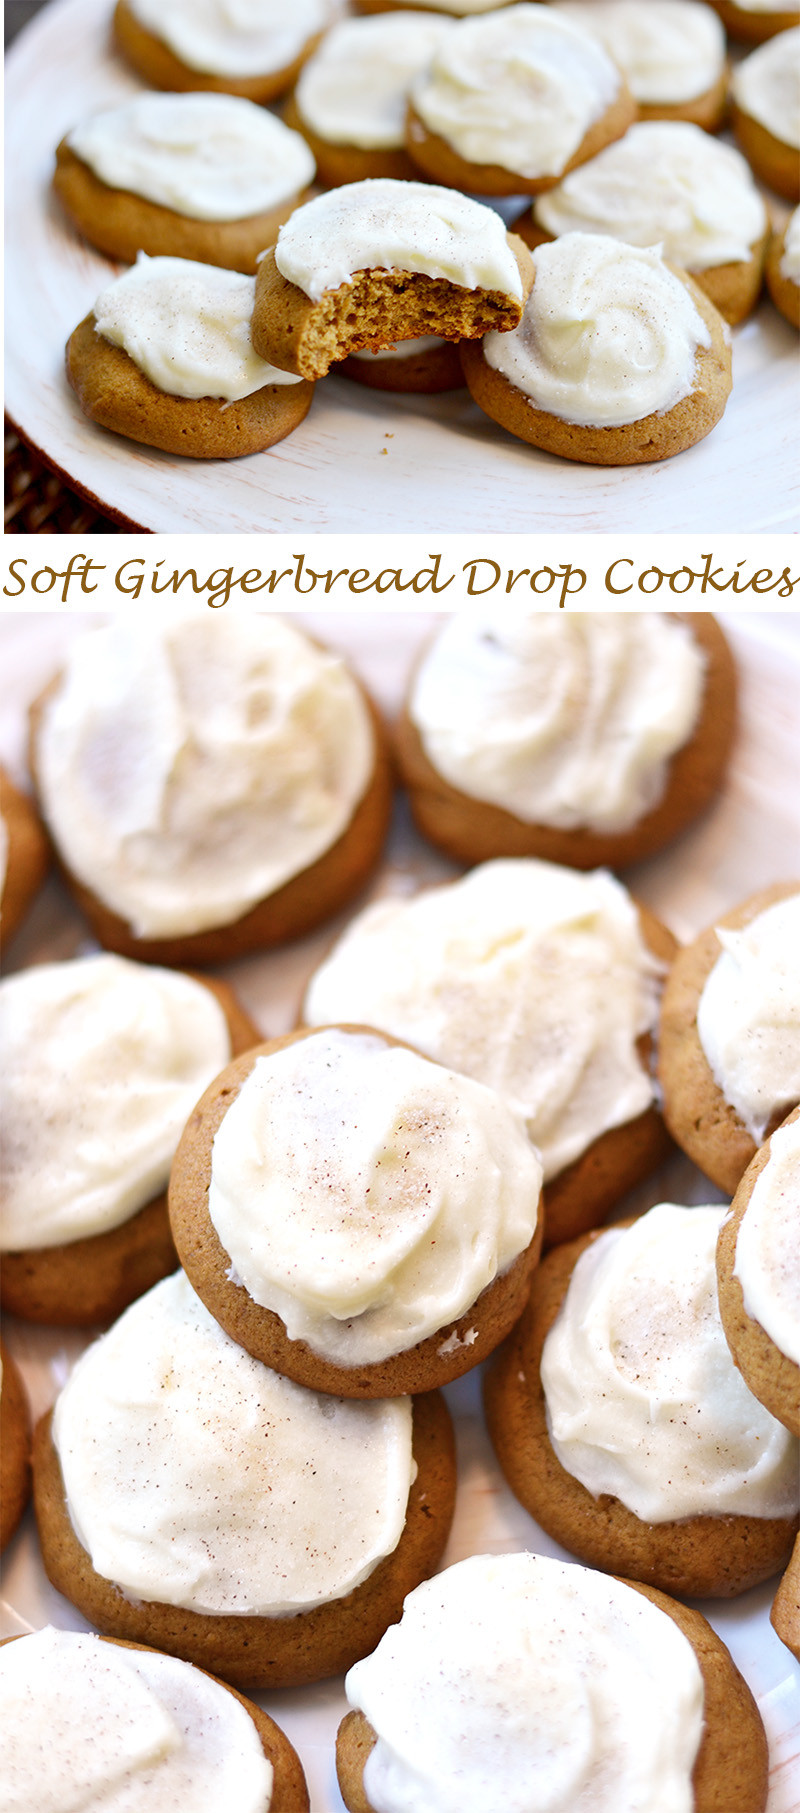 Soft Gingerbread Cookies
 Soft Gingerbread Drop Cookies with Cream Cheese Frosting